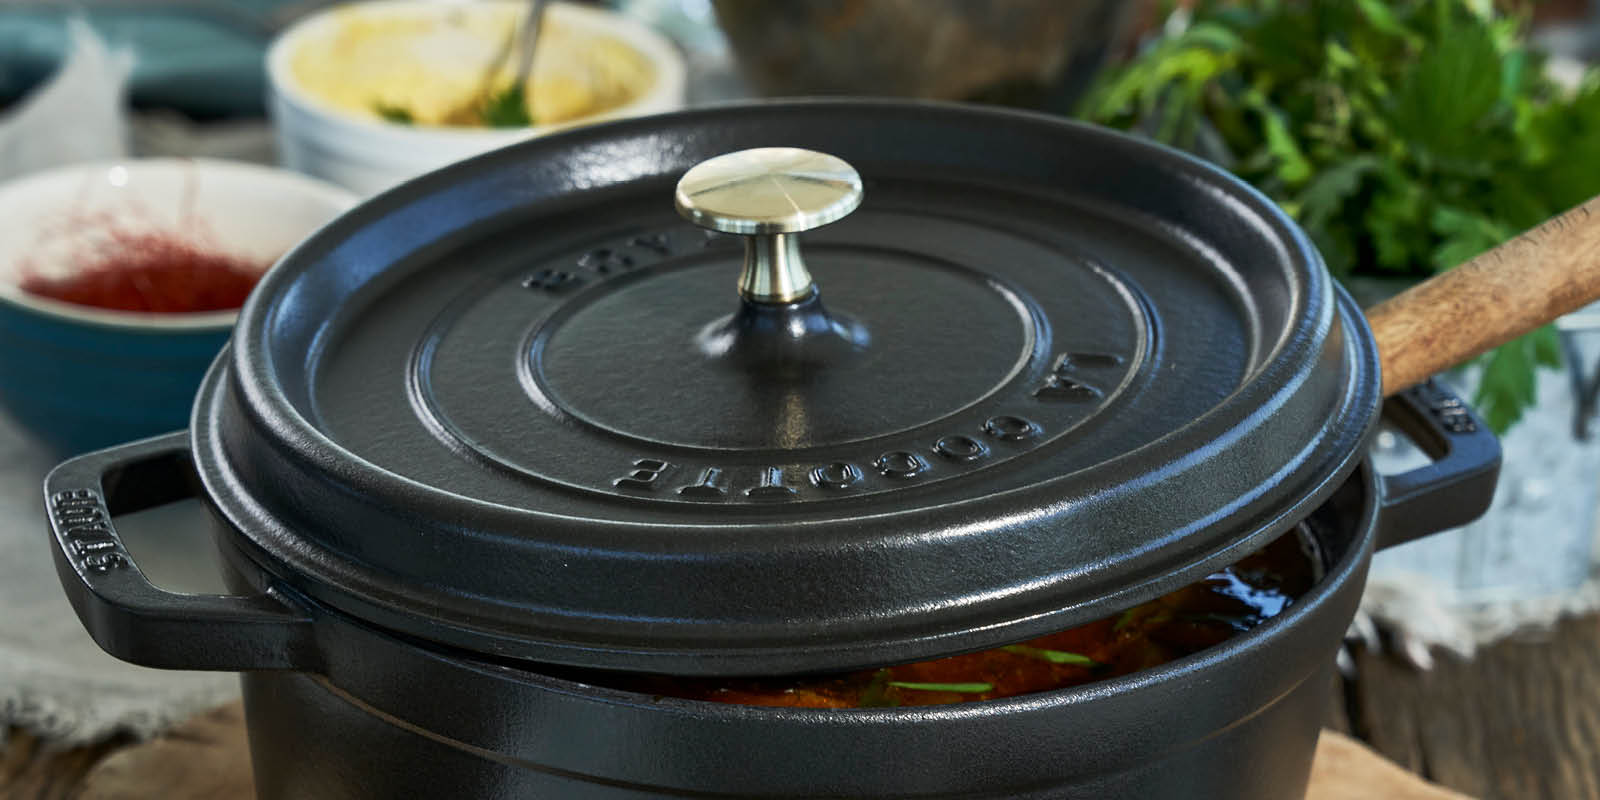 https://www.zwilling.com/on/demandware.static/-/Sites-zwilling-us-Library/default/dw06f4bc0d/images/product-content/masonry-content/staub/cookware/la-cocotte/40500-241-0_Lifestyle_Image_Series_OS_1200x600.jpg